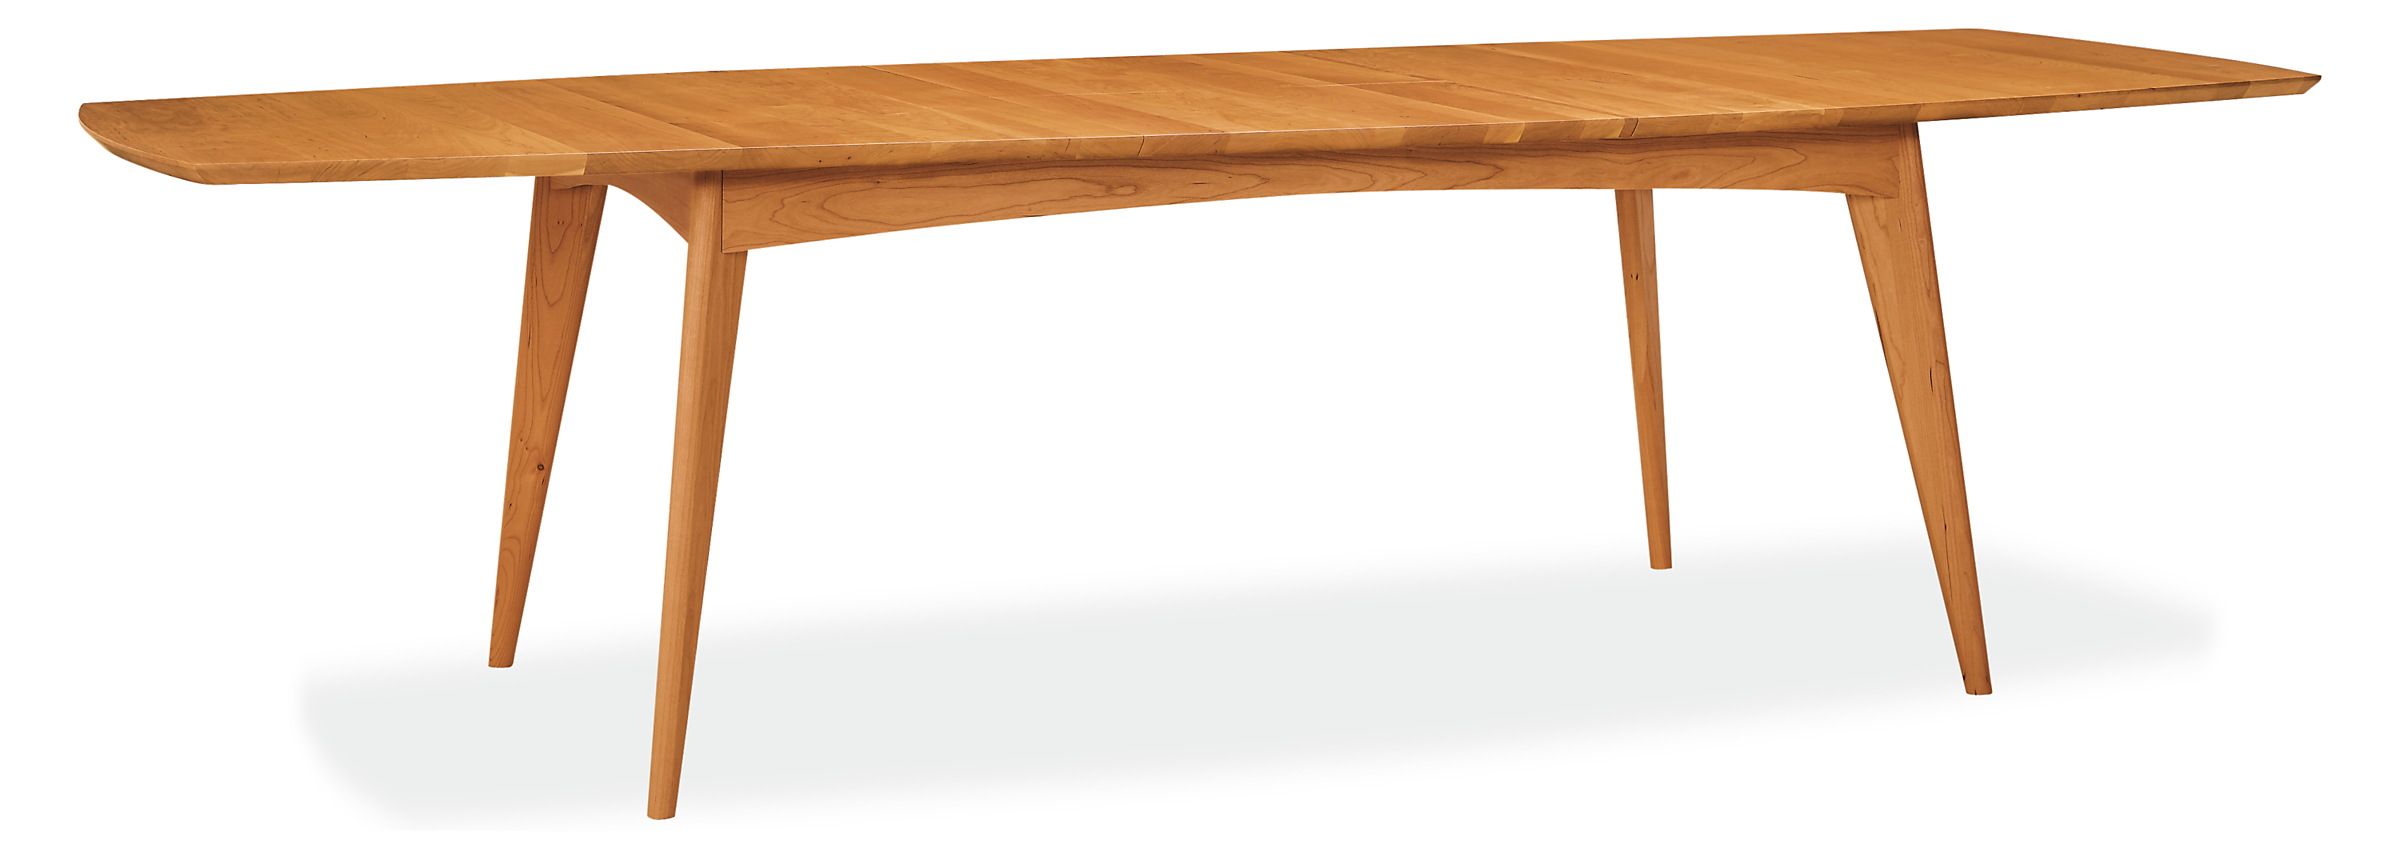 Open detail of Ventura 84w 42d 29h Extension Table in Cherry.